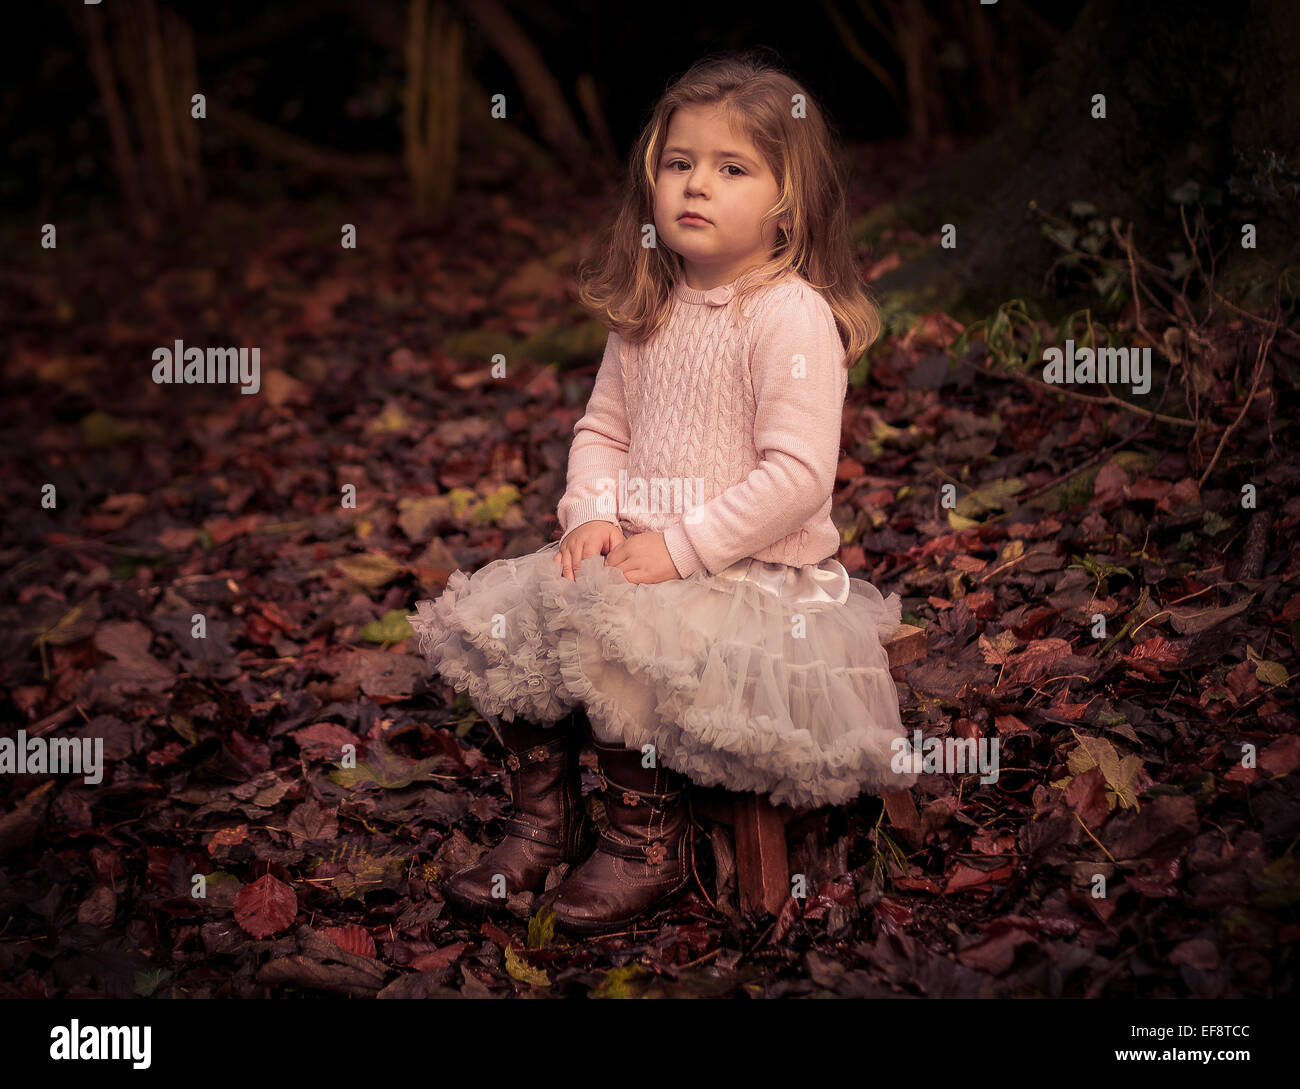 Portrait of Girl sitting in autumn forest Banque D'Images